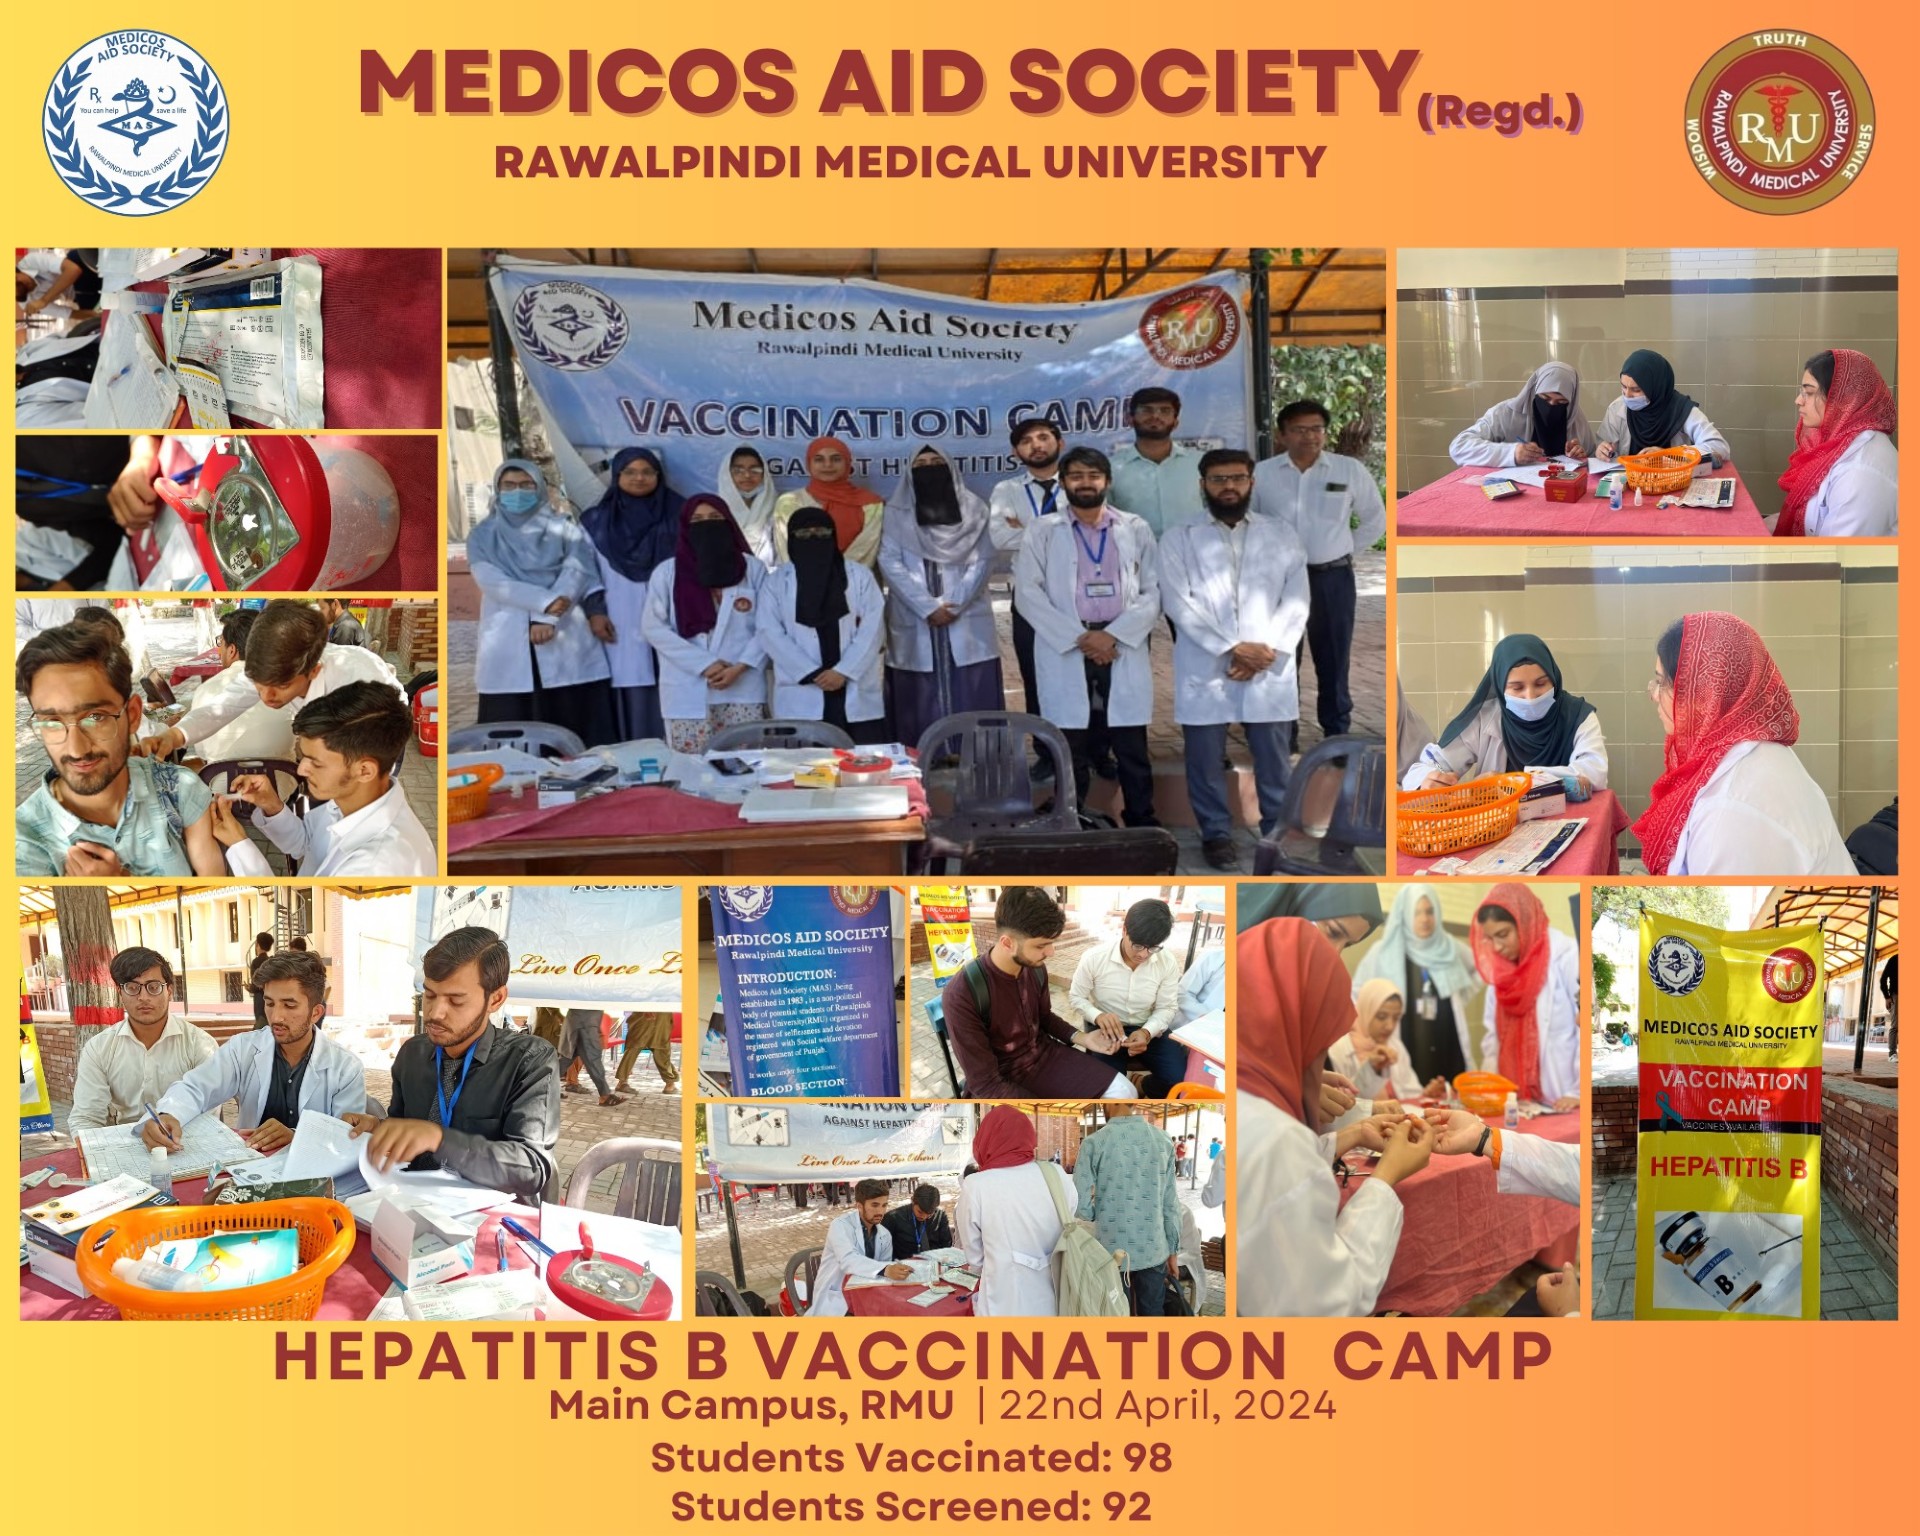 Medicos Aid Society has organized a vaccination & screening camp against Hepatitis B on, 22nd April 2024 at Main Campus, RMU and vaccinated 98 students and screened 92 students successfully.